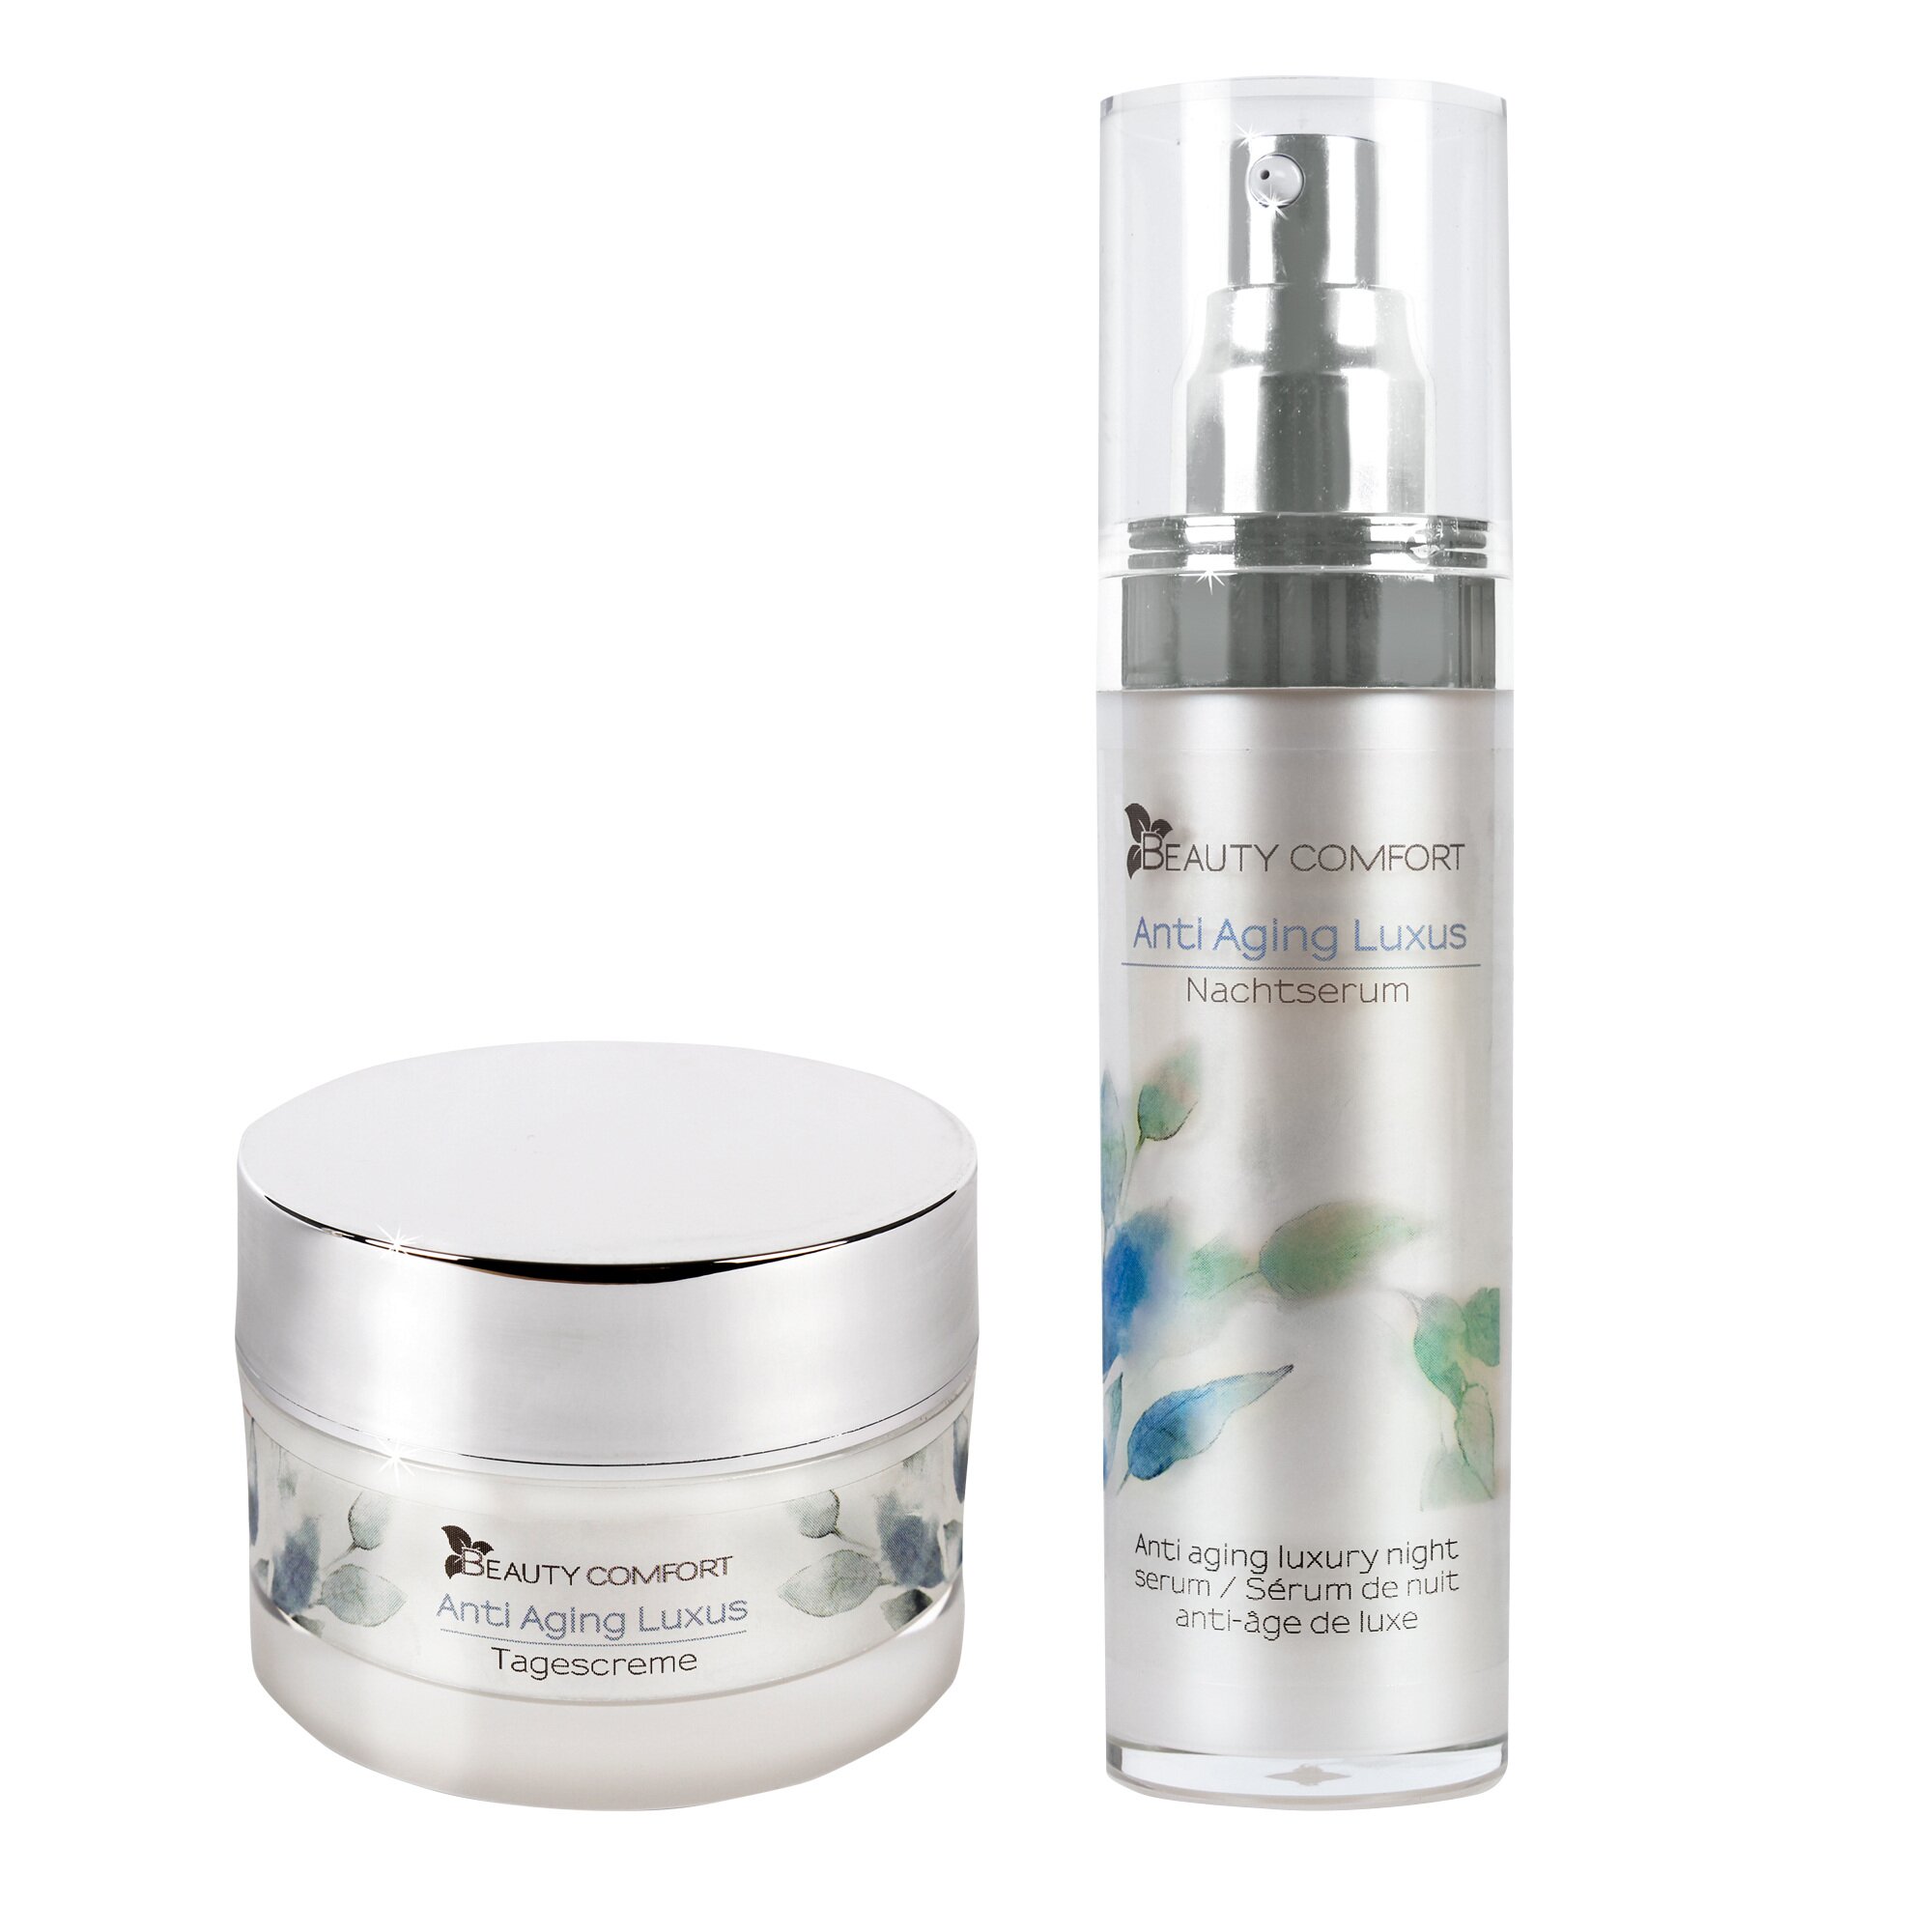 Image of Anti Aging Luxus Tages- und Nachtcreme, 2 Teile